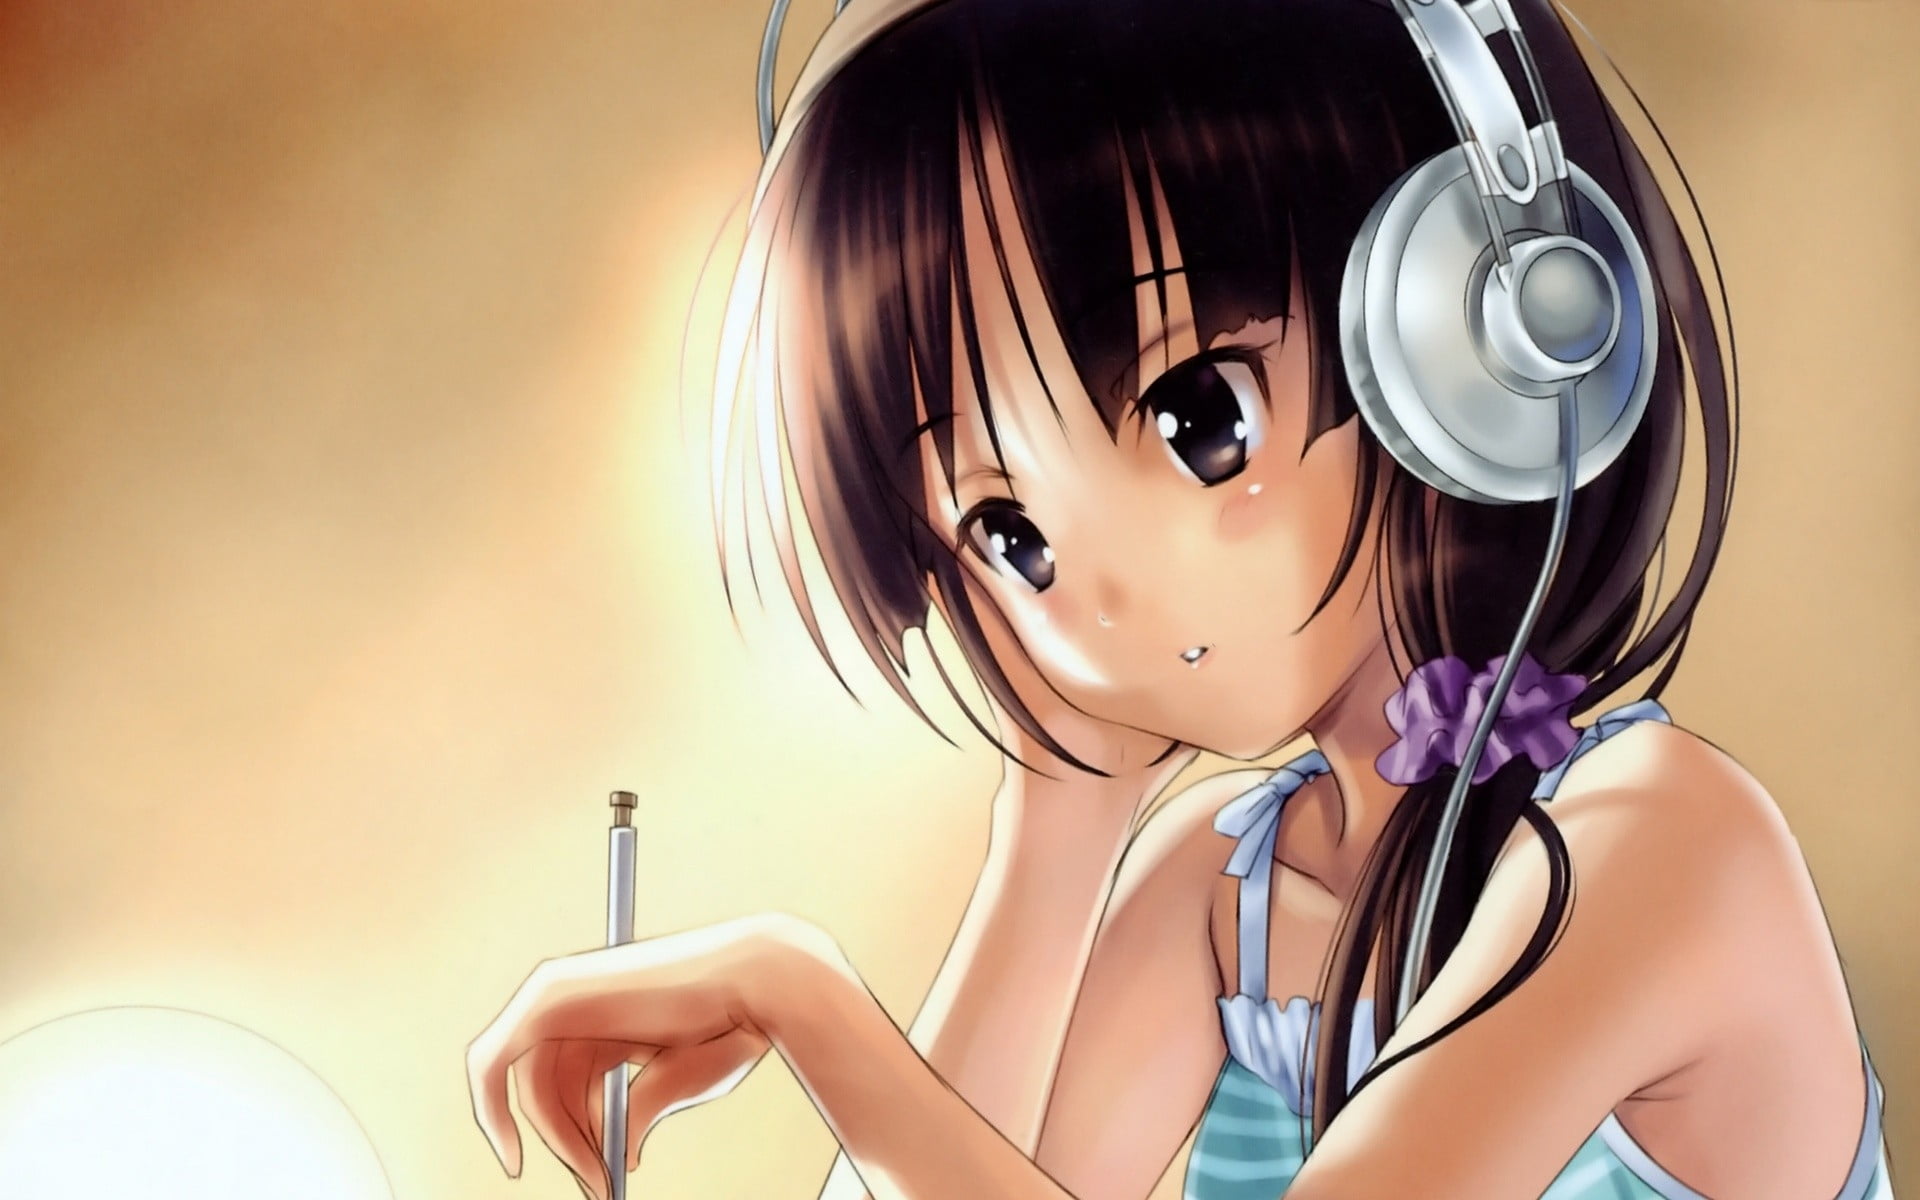 Female Anime Character With Black Hair And Gray Headphones